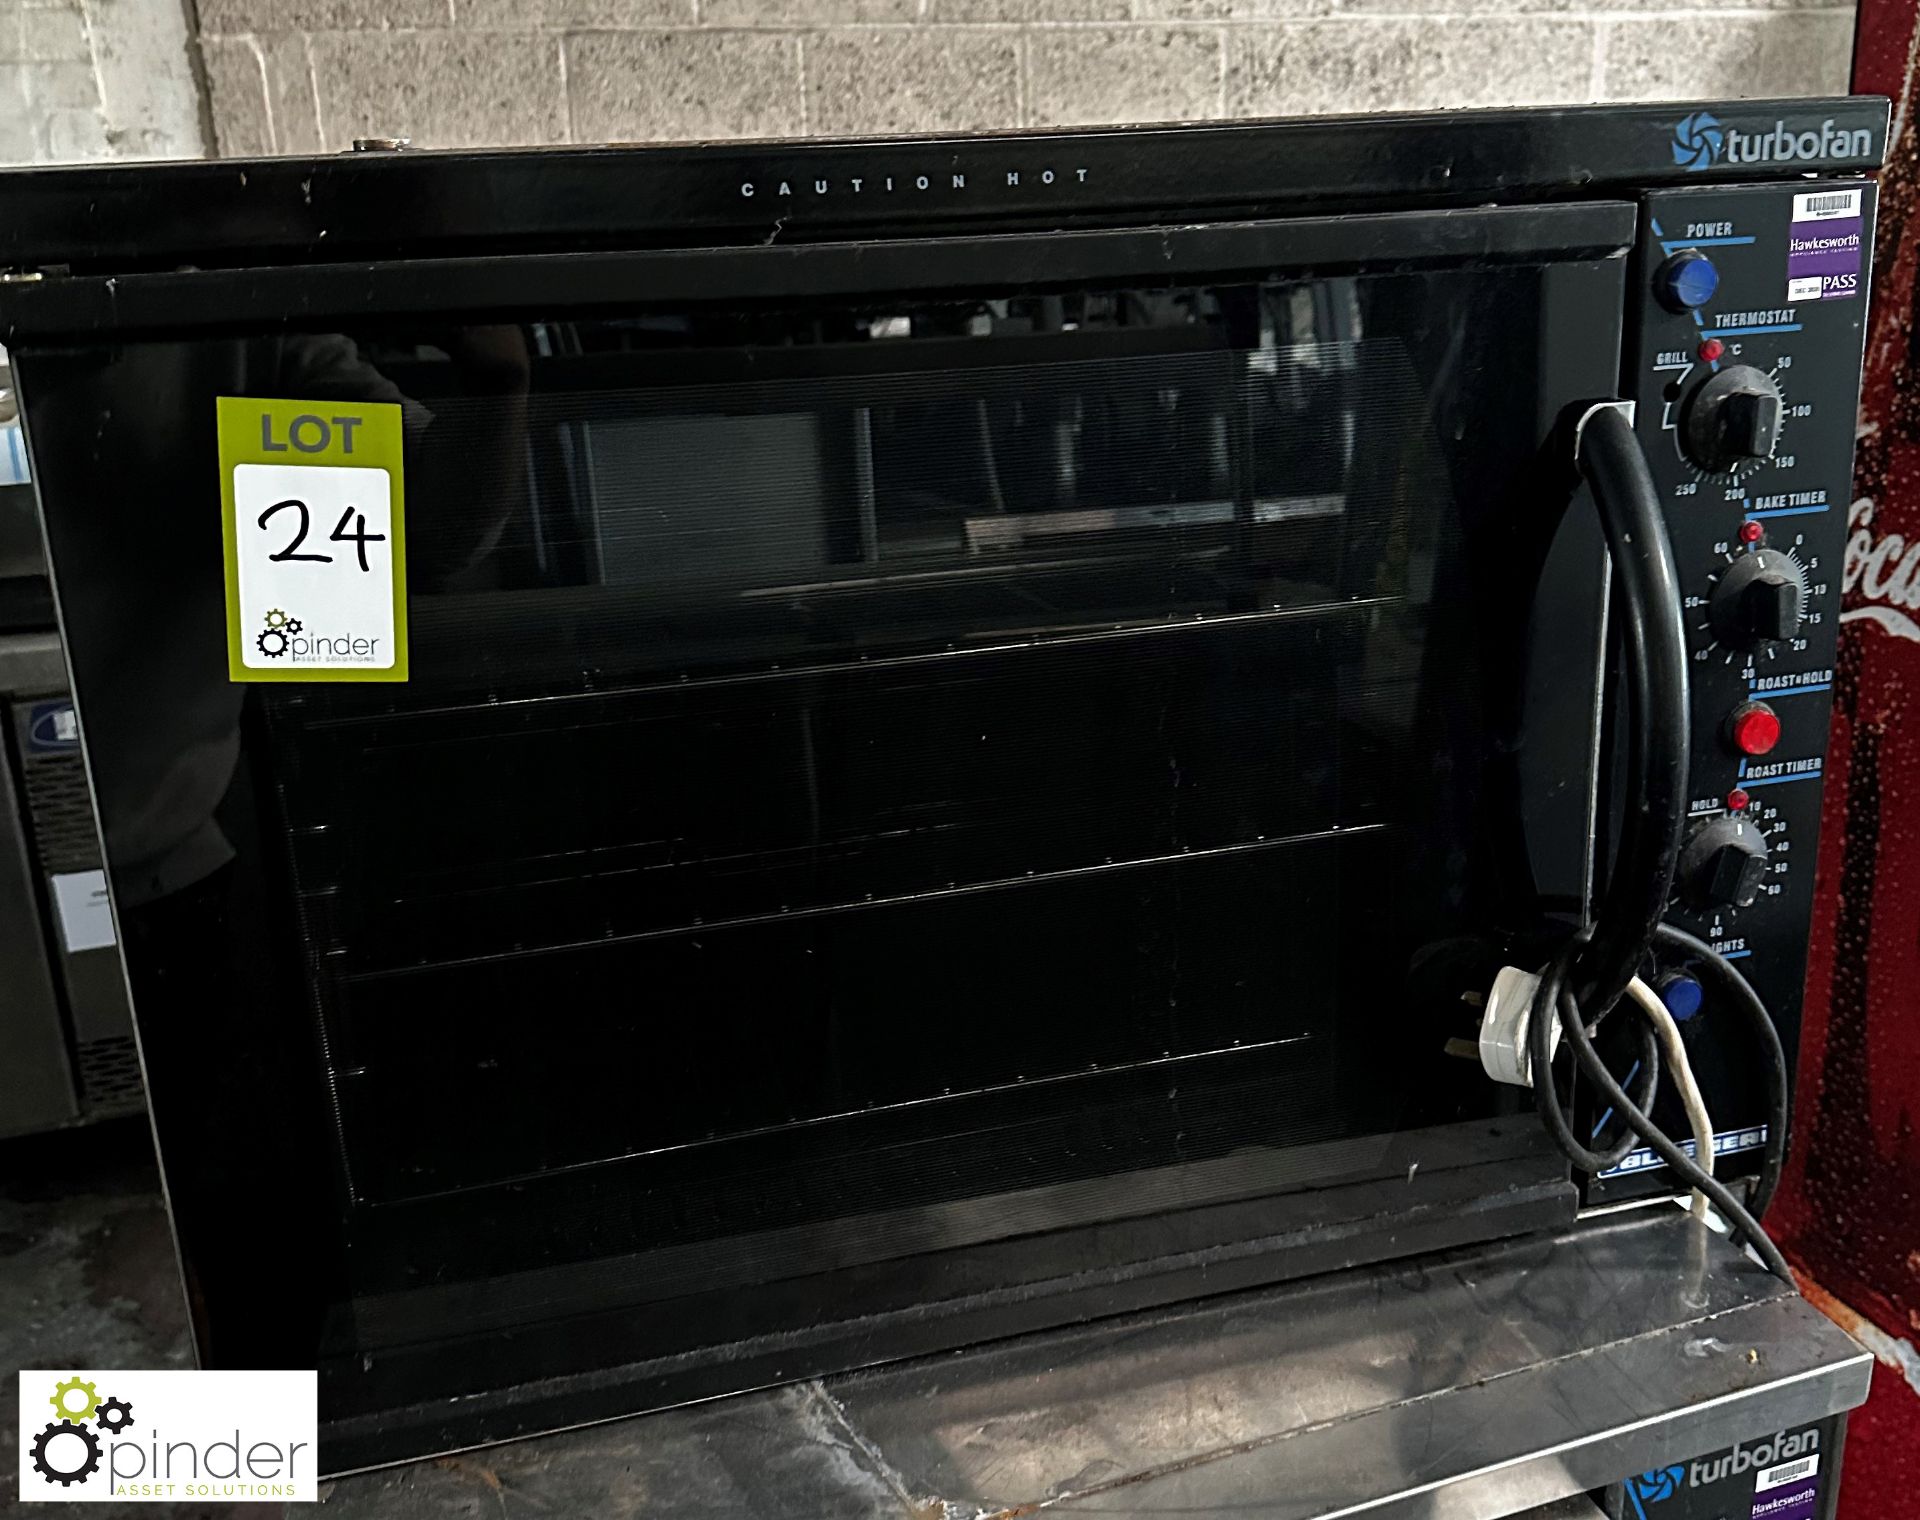 Blueseal Turbo Fan Electric Oven, 240volts - Image 2 of 5